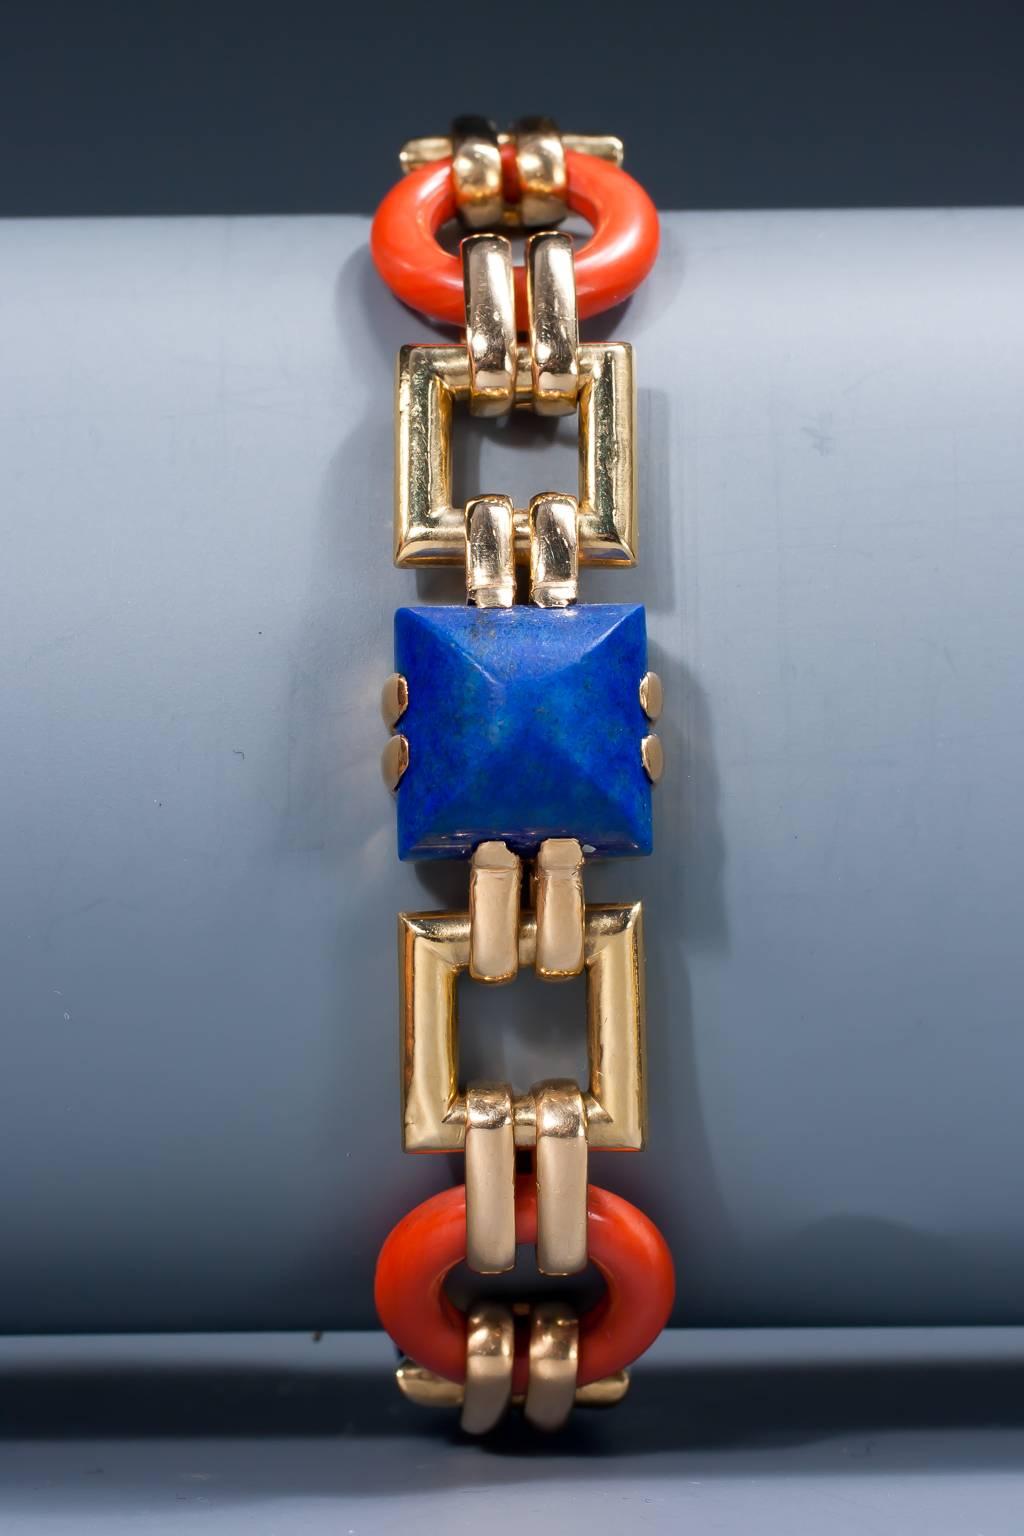 A rare Art Deco gold, lapis and coral bracelet by Cartier, composed of 3 circular coral links, 3 sugarloaf cut lapis lazuli and 6 square links in 18 karat gold.

According to the Cartier archives this bracelet was made by Georges Lenfant for